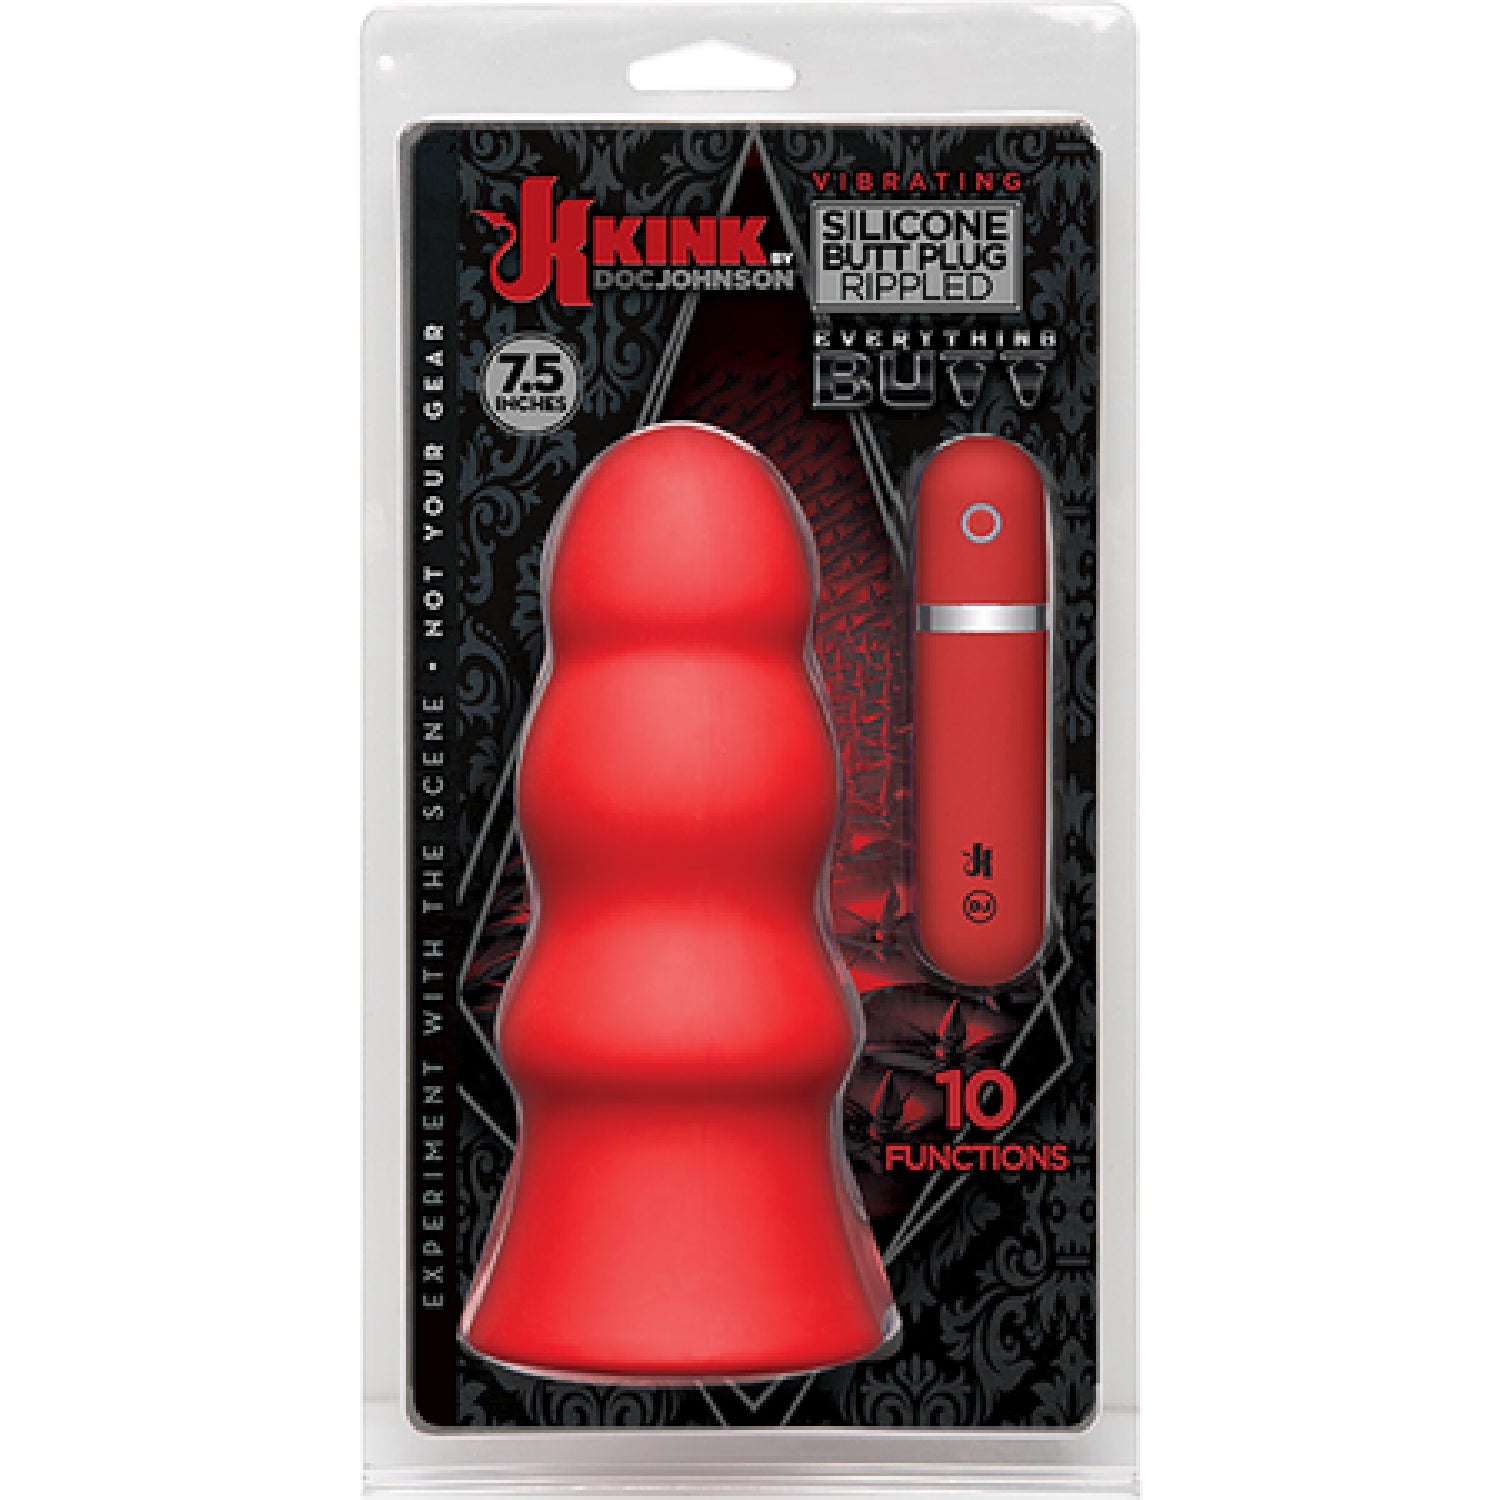 Vibrating Silicone Butt Plug - Rippled 7.5" (Red) Default Title - Club X